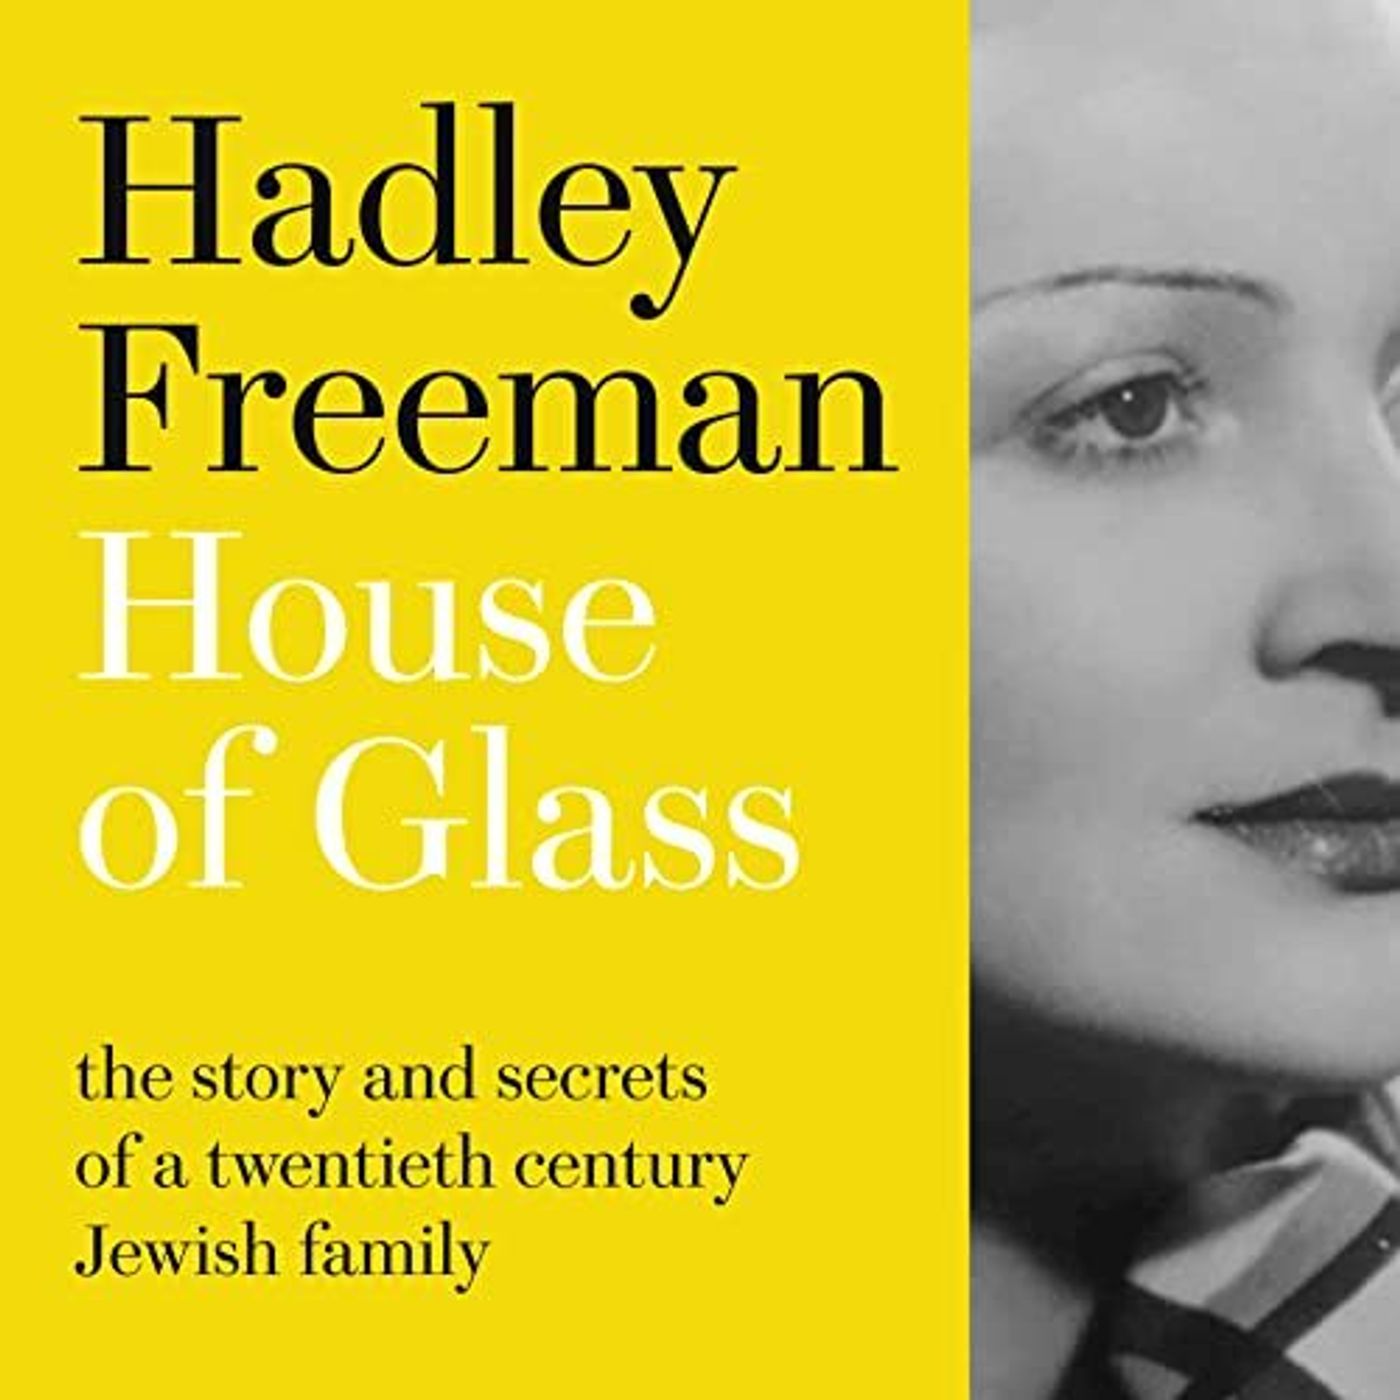 From The Archives: Hadley Freeman